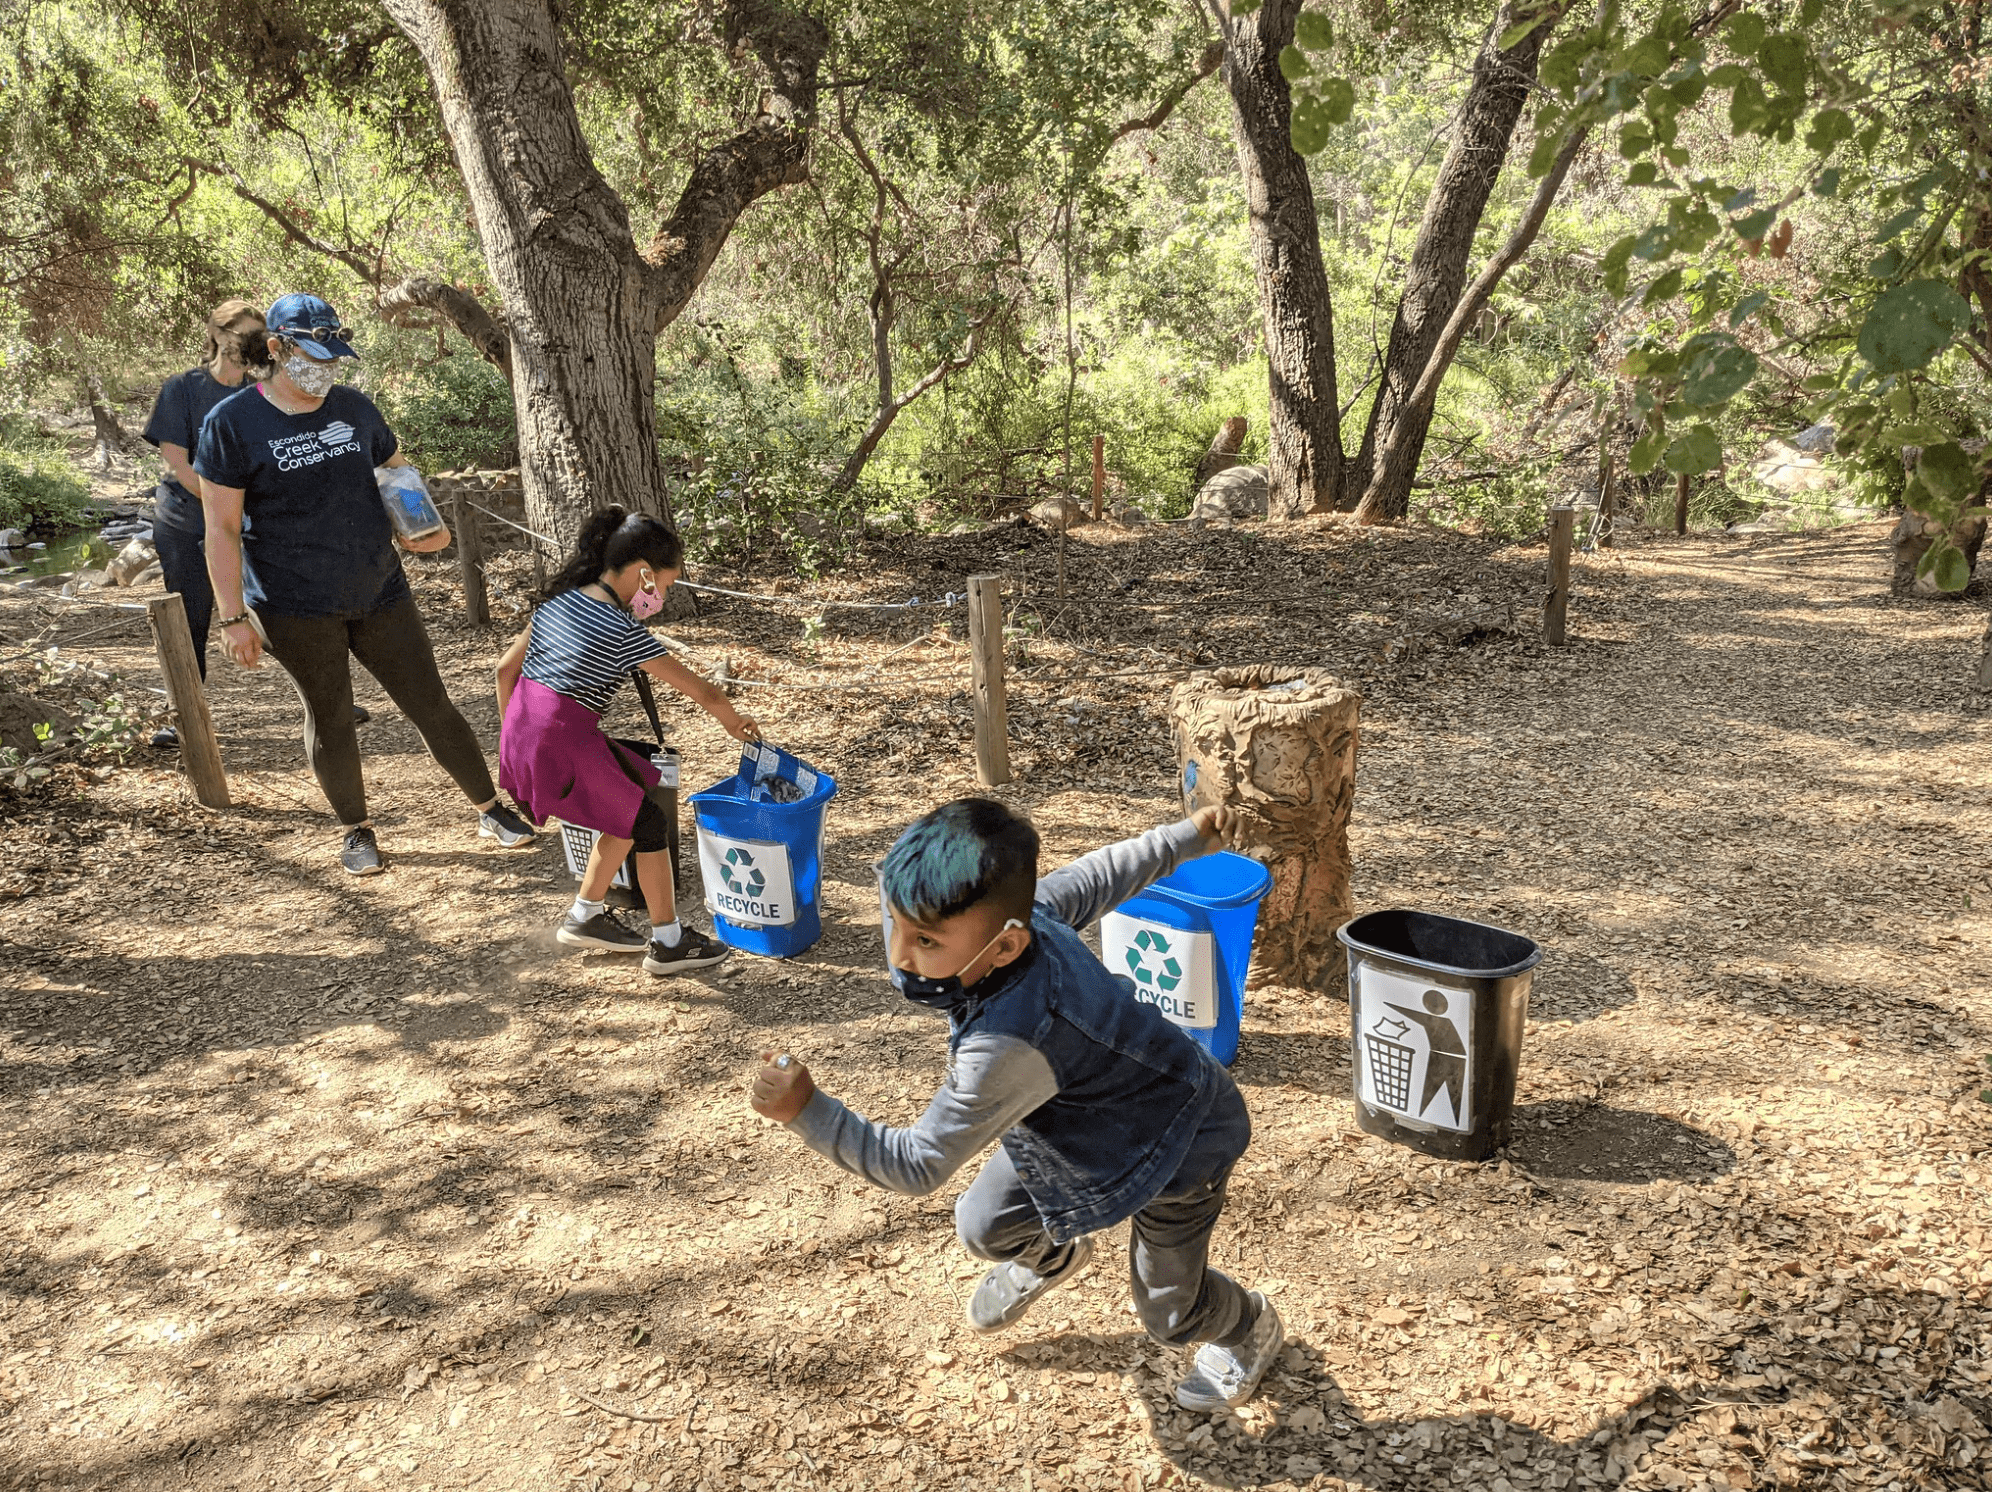 Elementary age students running to pick up a piece of recycling on the ground under a canopy of trees. A row of recycle bins cuts through the center of the image. One student is running towards the camera, while another is dropping a piece of recycling in the buckets. Other students and camp counselors look on.